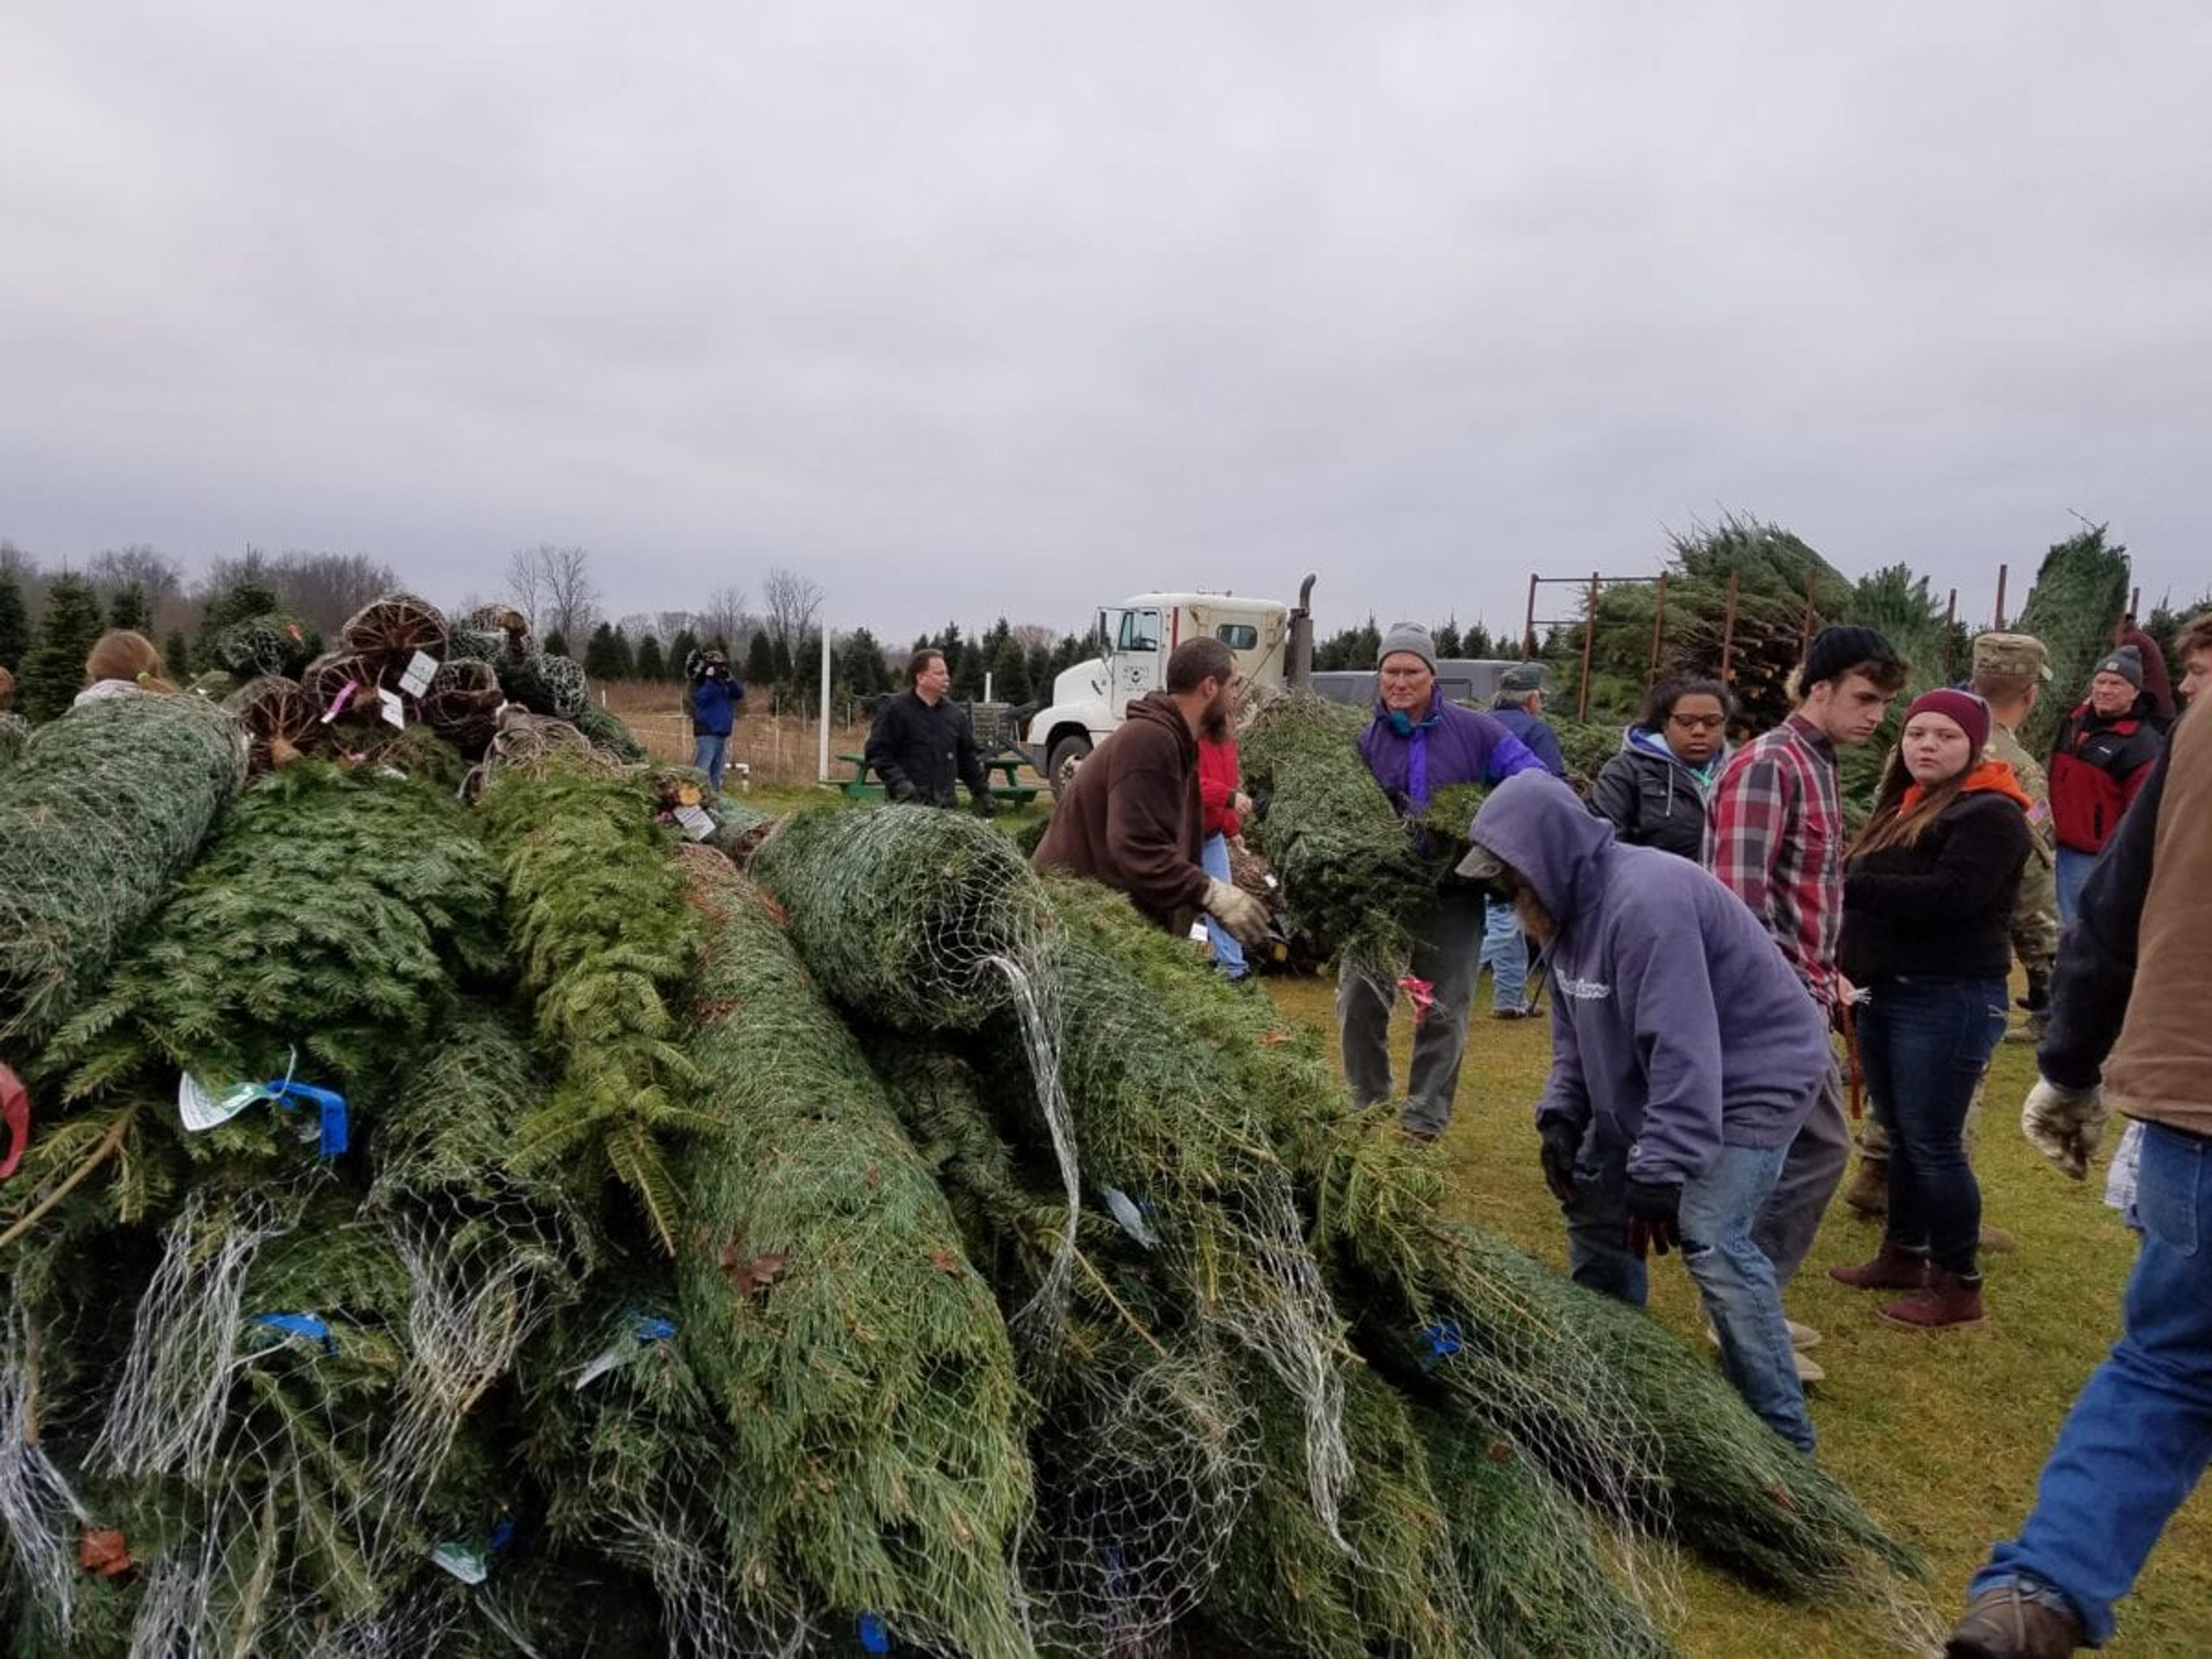 Tree collection day at Wahmhoff Farms Nursery. Photo courtesy of Marsha Gray